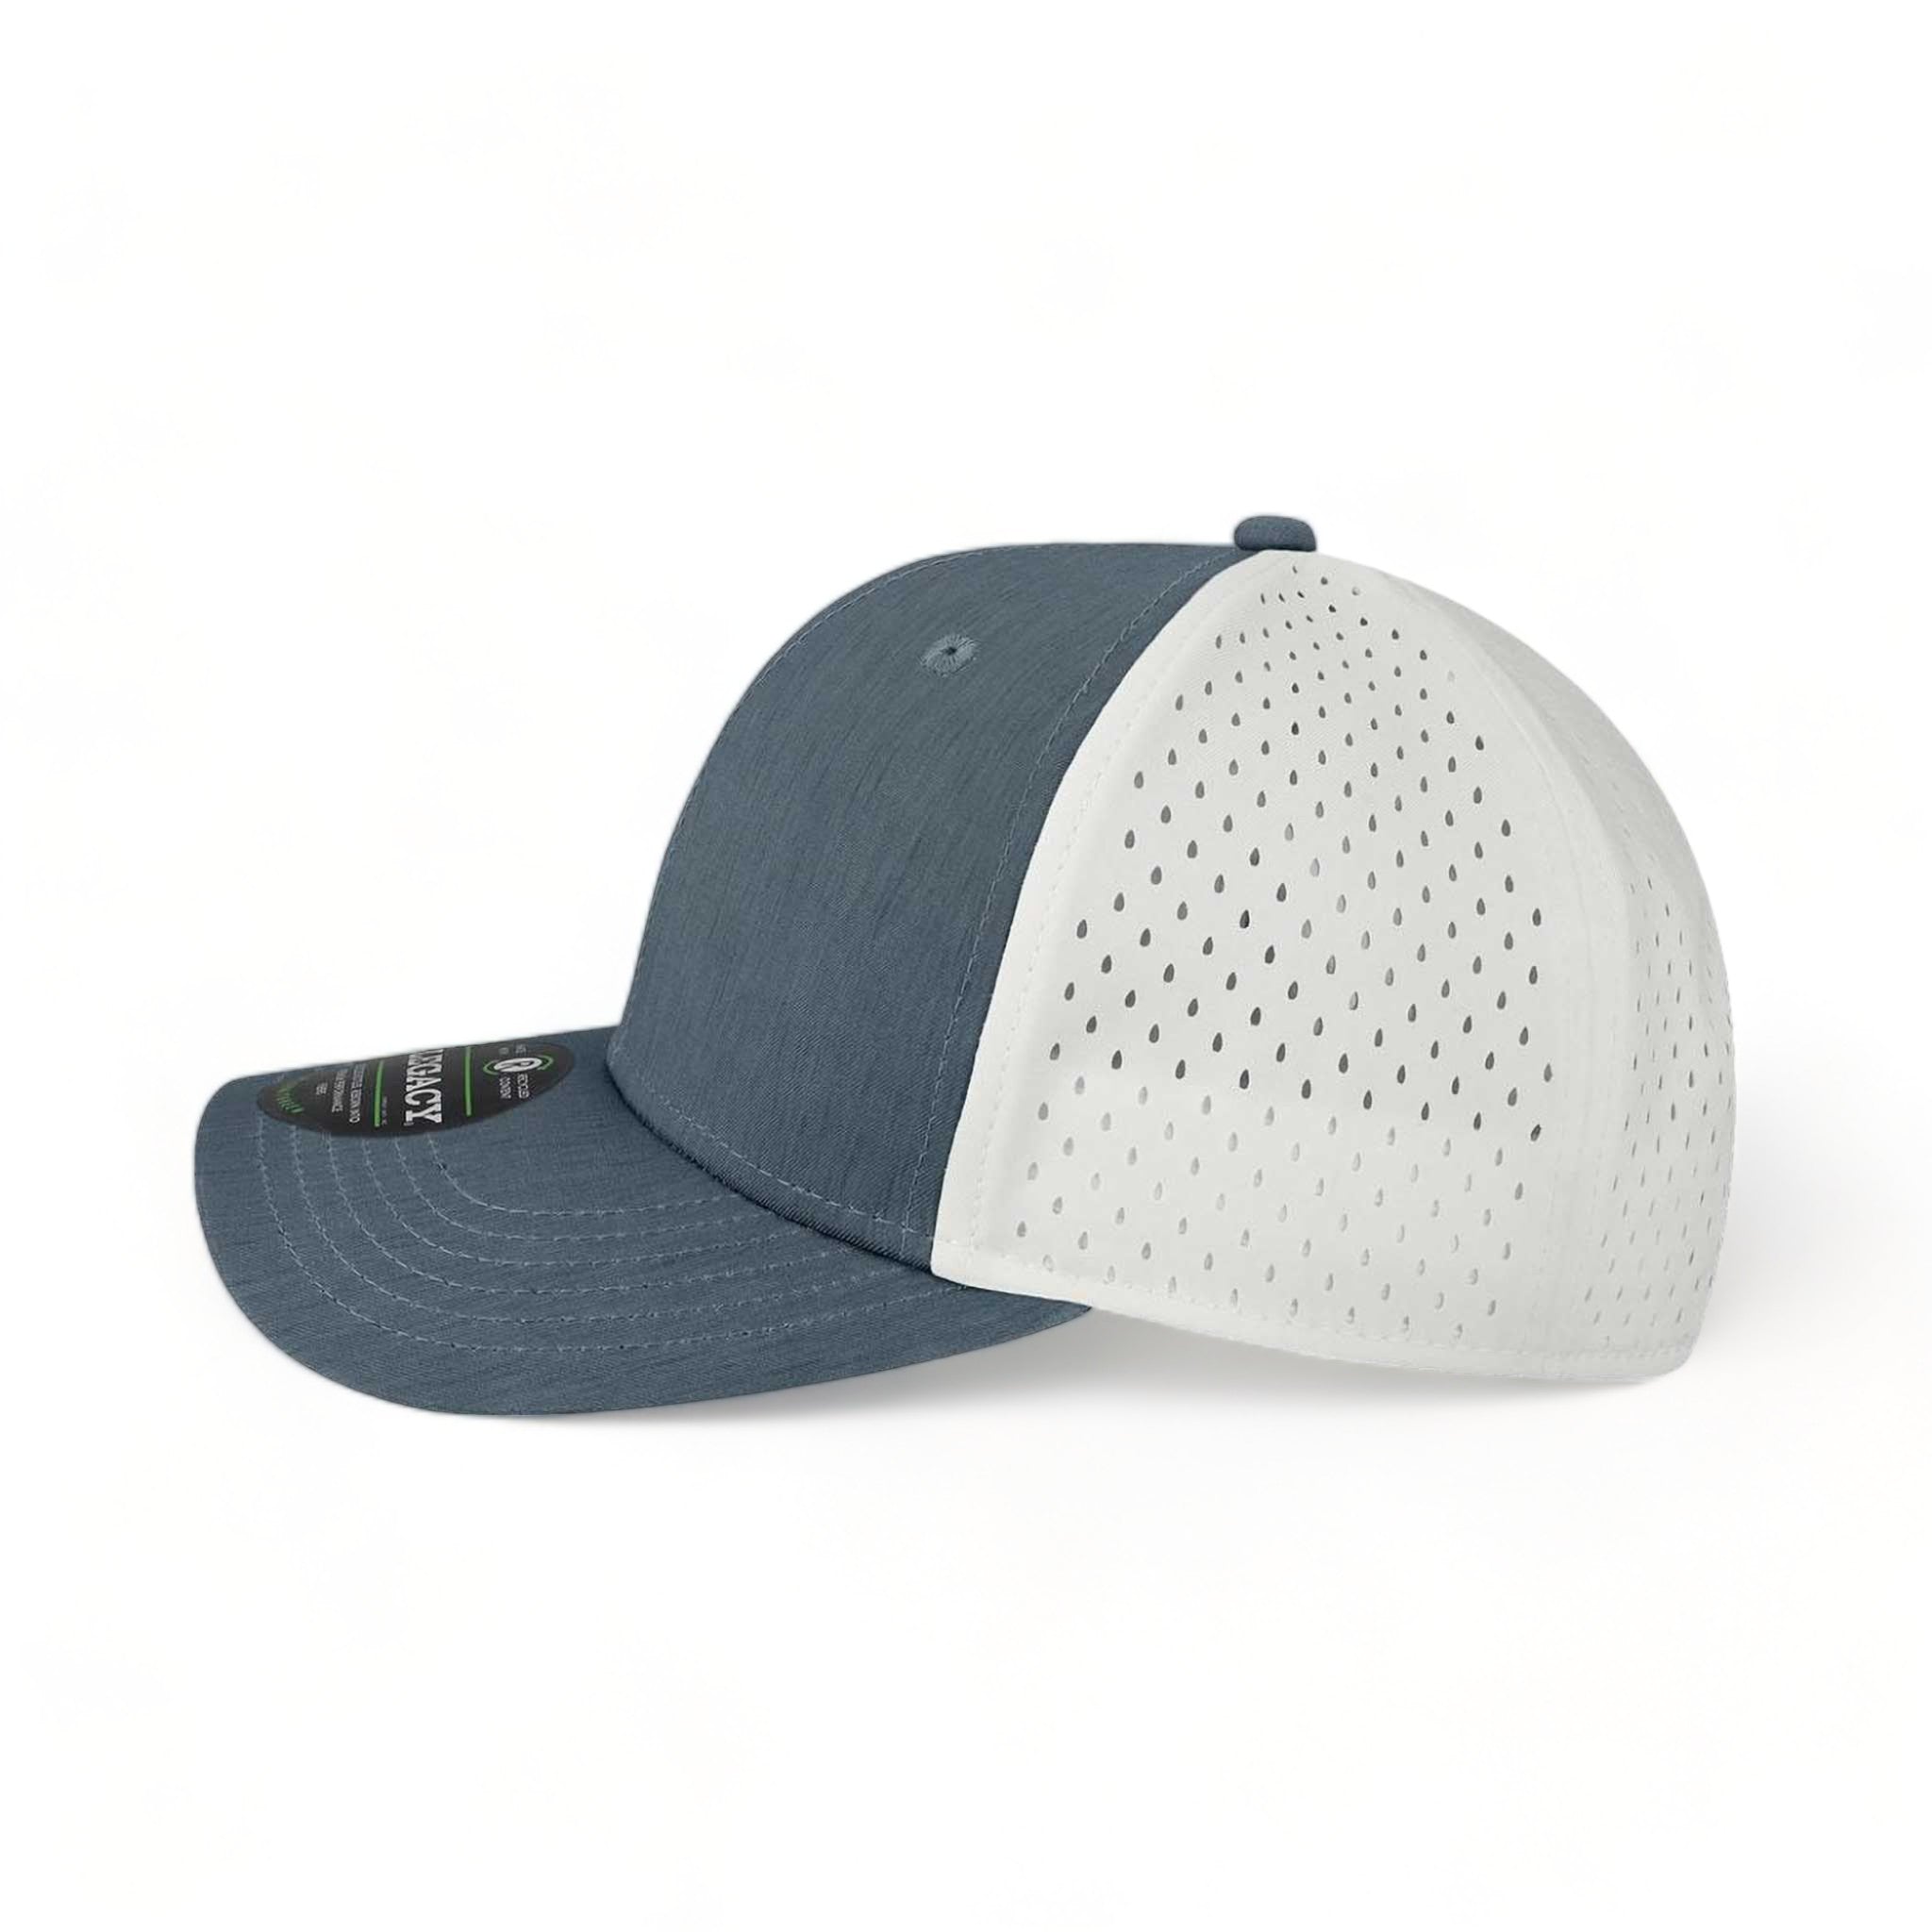 Side view of LEGACY REMPA custom hat in eco navy and white